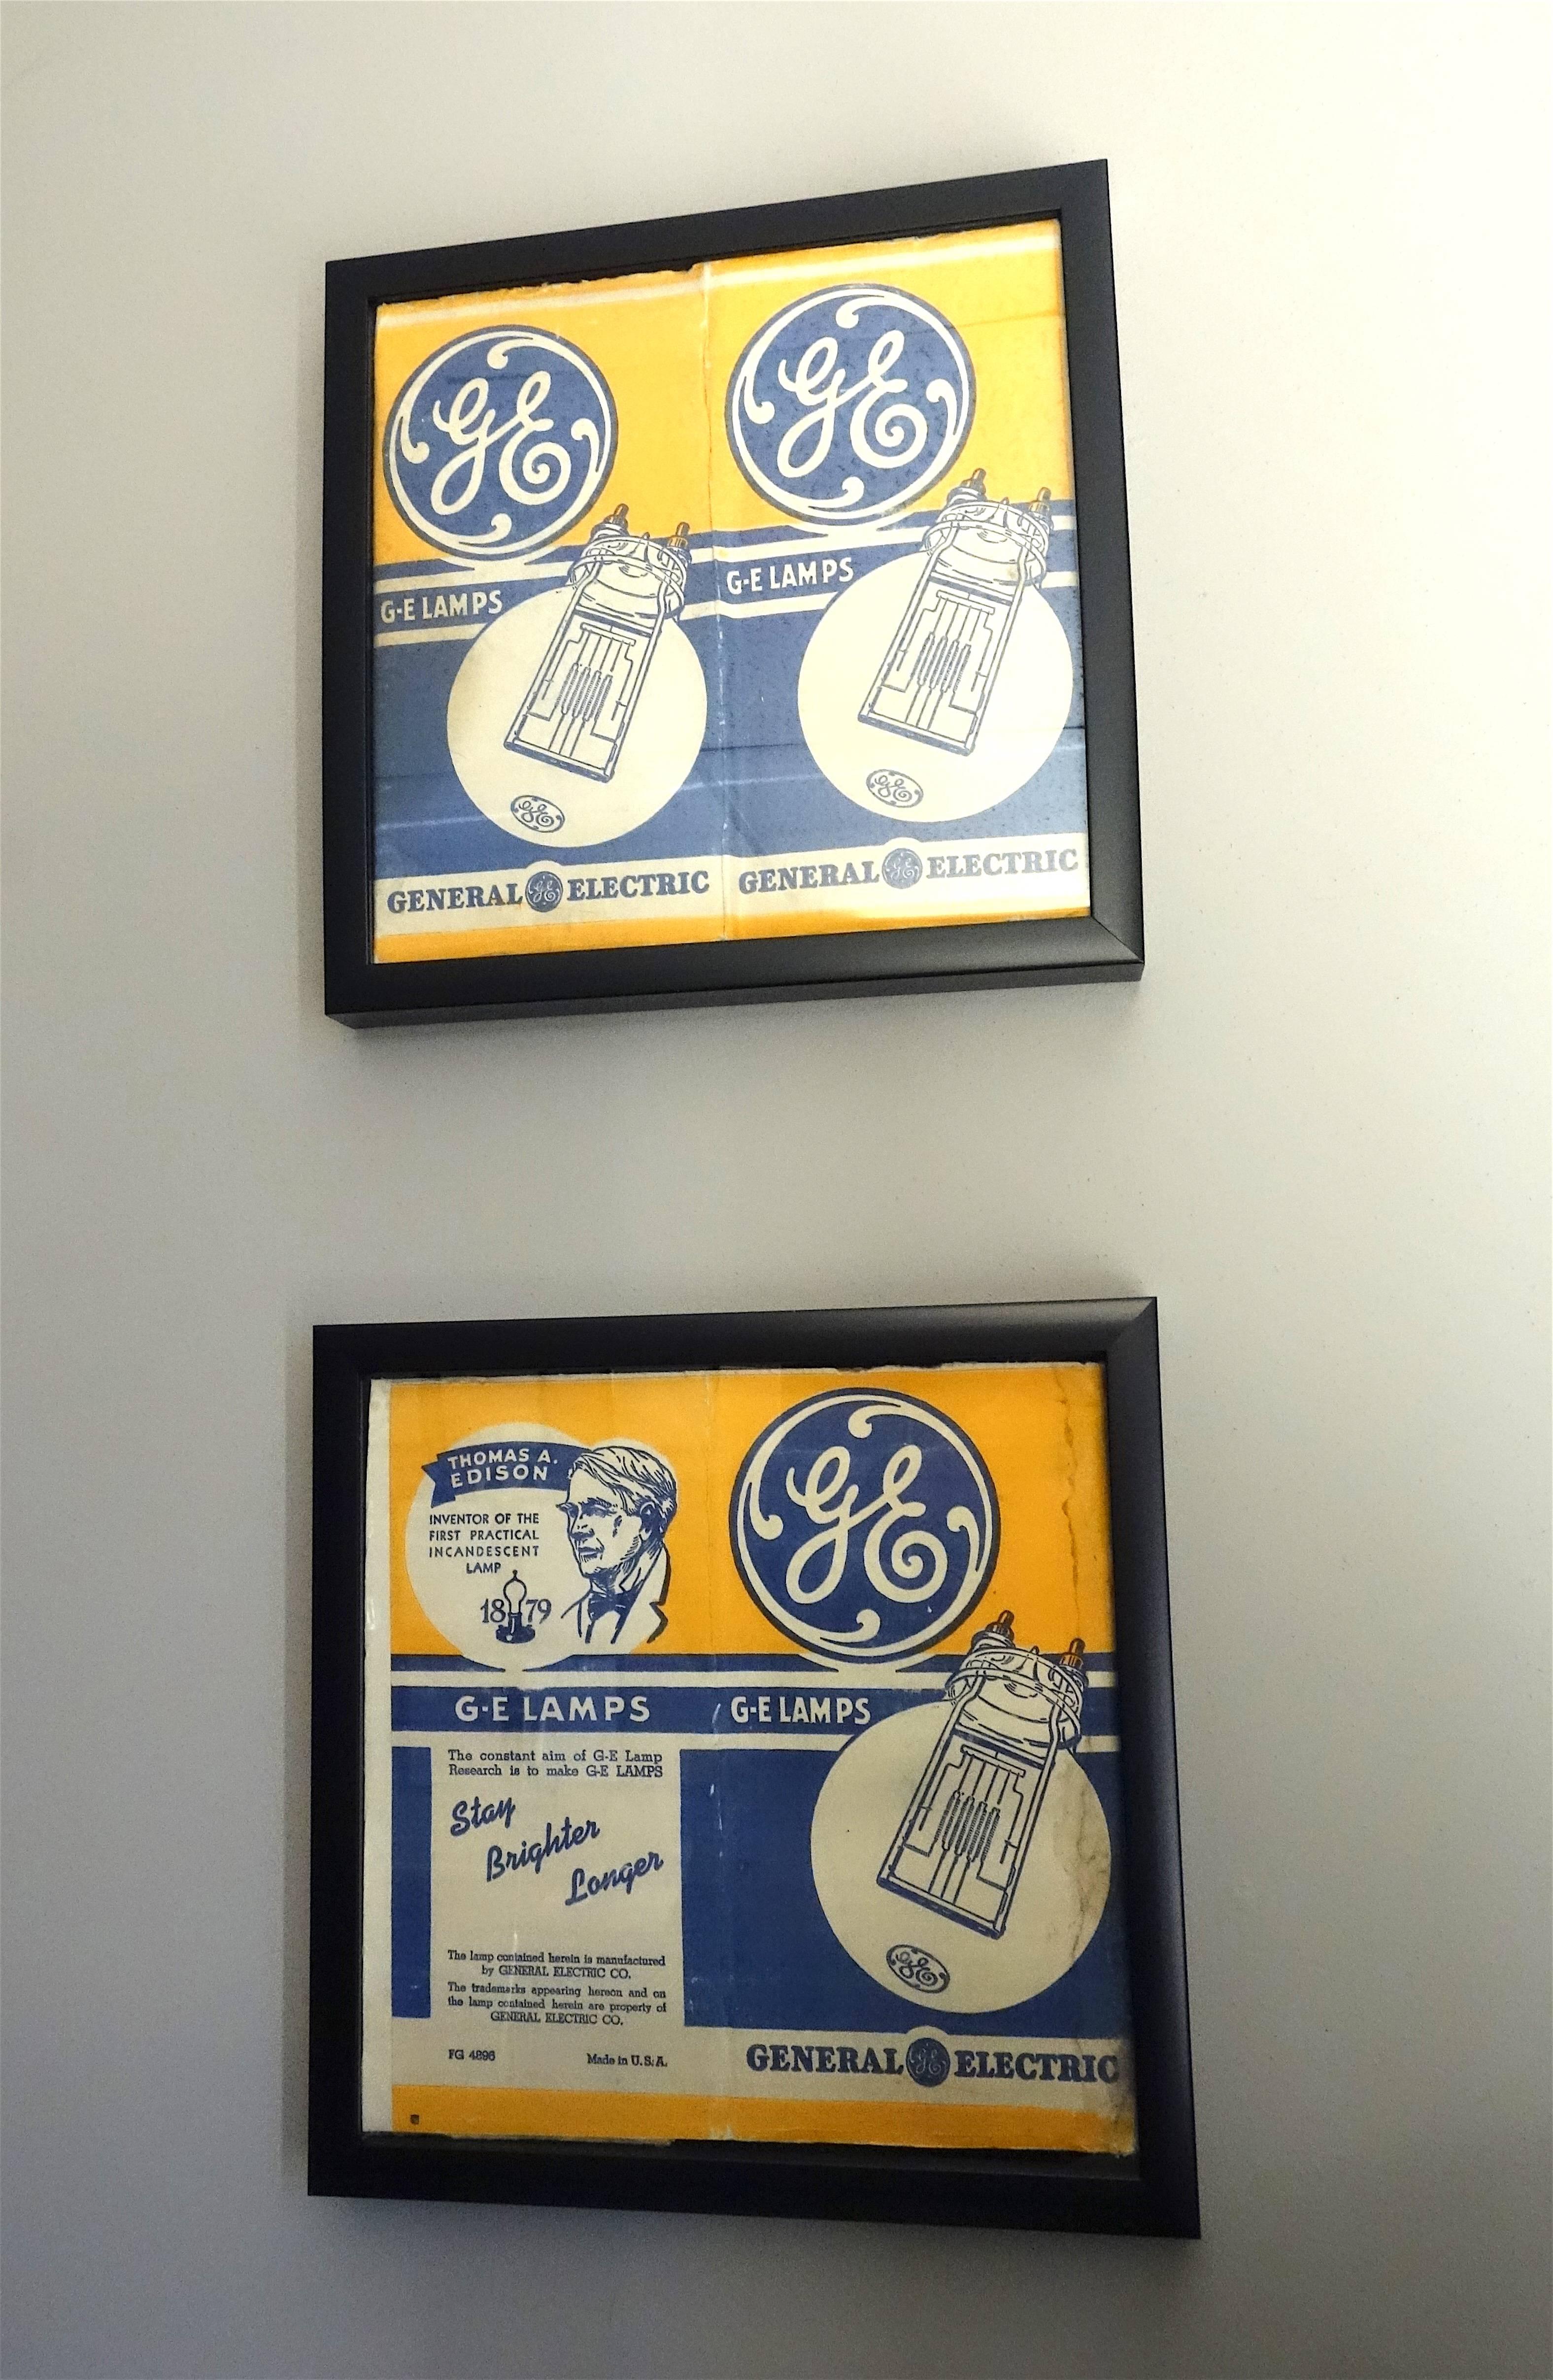 Submitted for your consideration is this framed pair of circa 1940s General Electric (G.E.) framed Motion Picture Studio Light Bulb packages / wrappers that all new G.E. lamps were delivered enclosed in during this period.

The colors are original